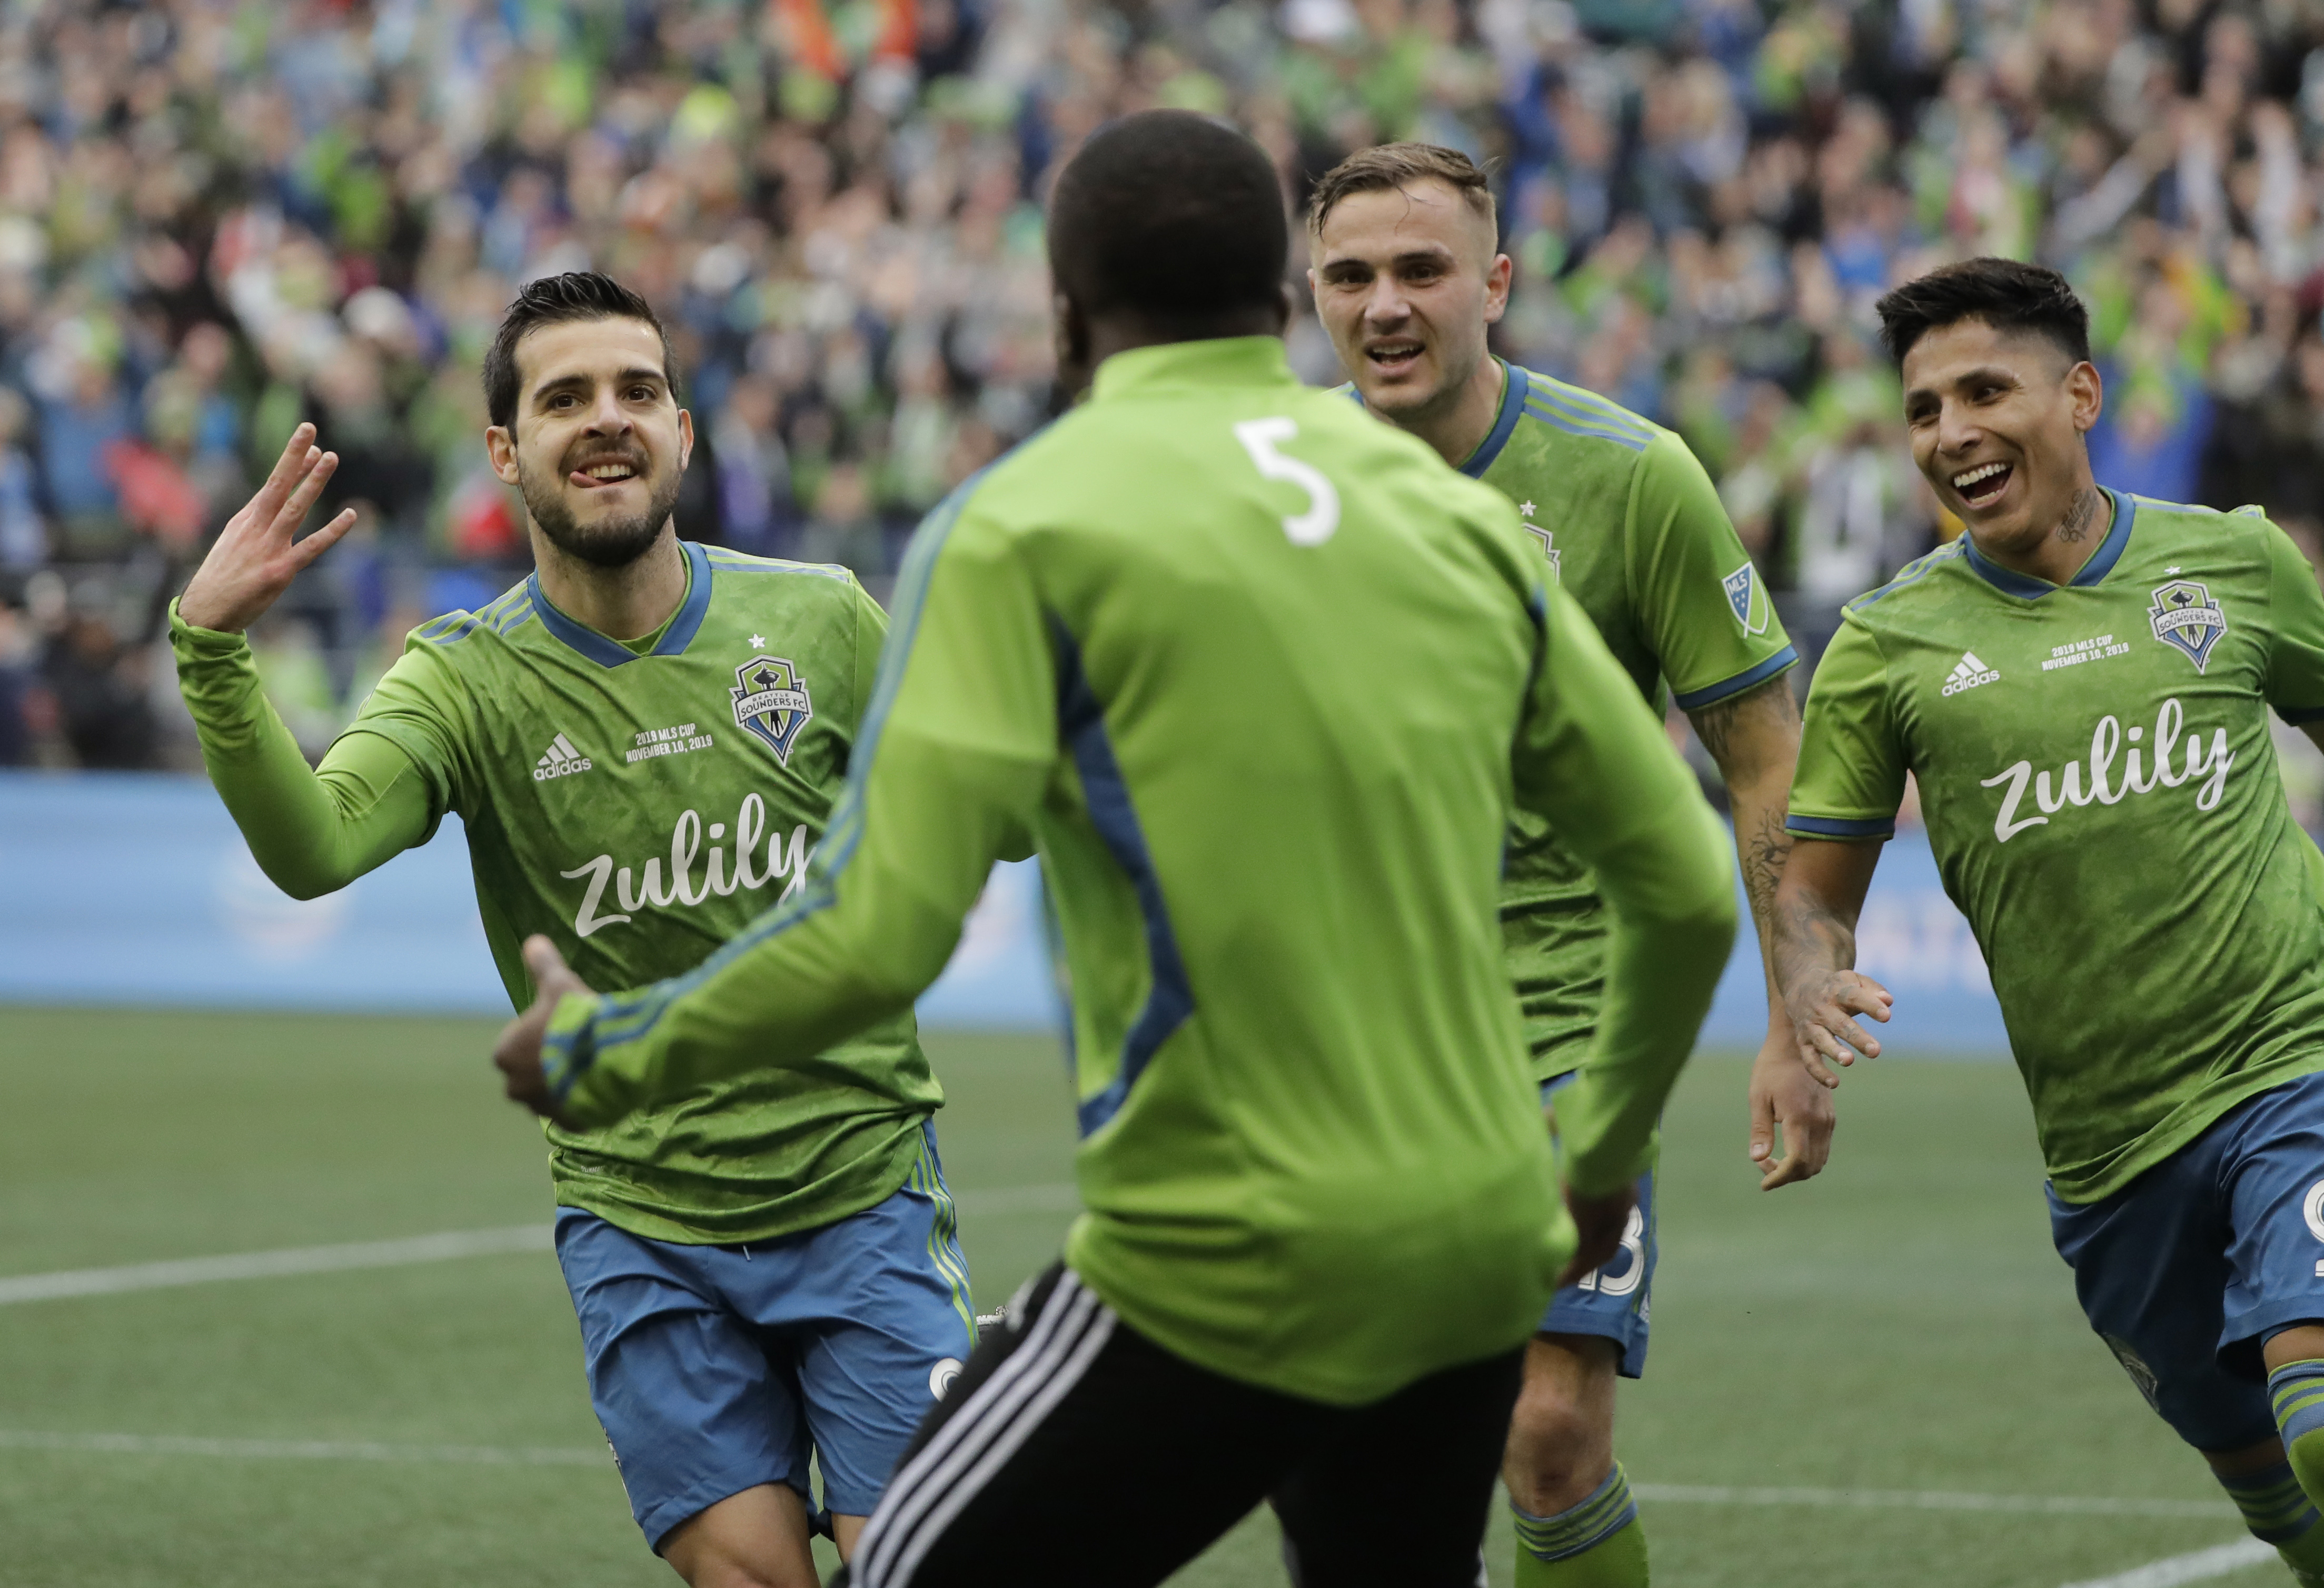 Sounders claim 2nd title in 4 years, beating Toronto FC 3-1